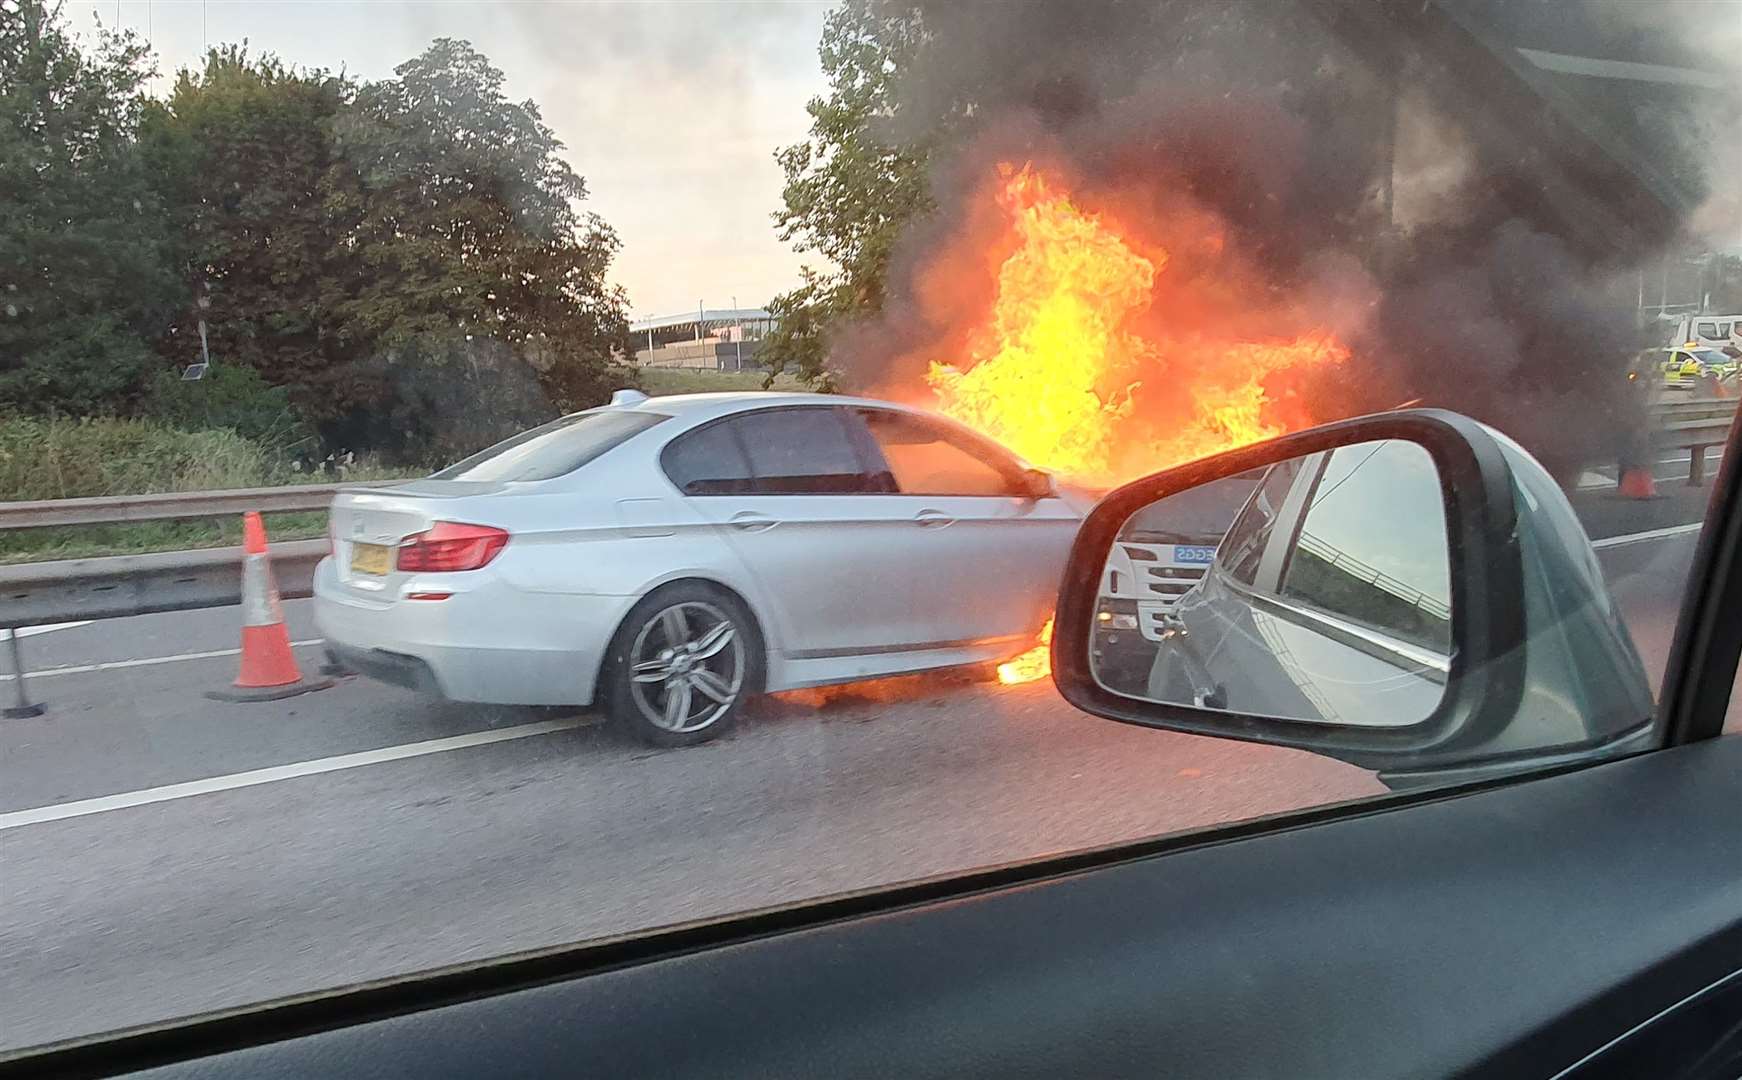 The car on fire which led to the closure of one of the Dartford tunnels. Picture: Sarah Goodman